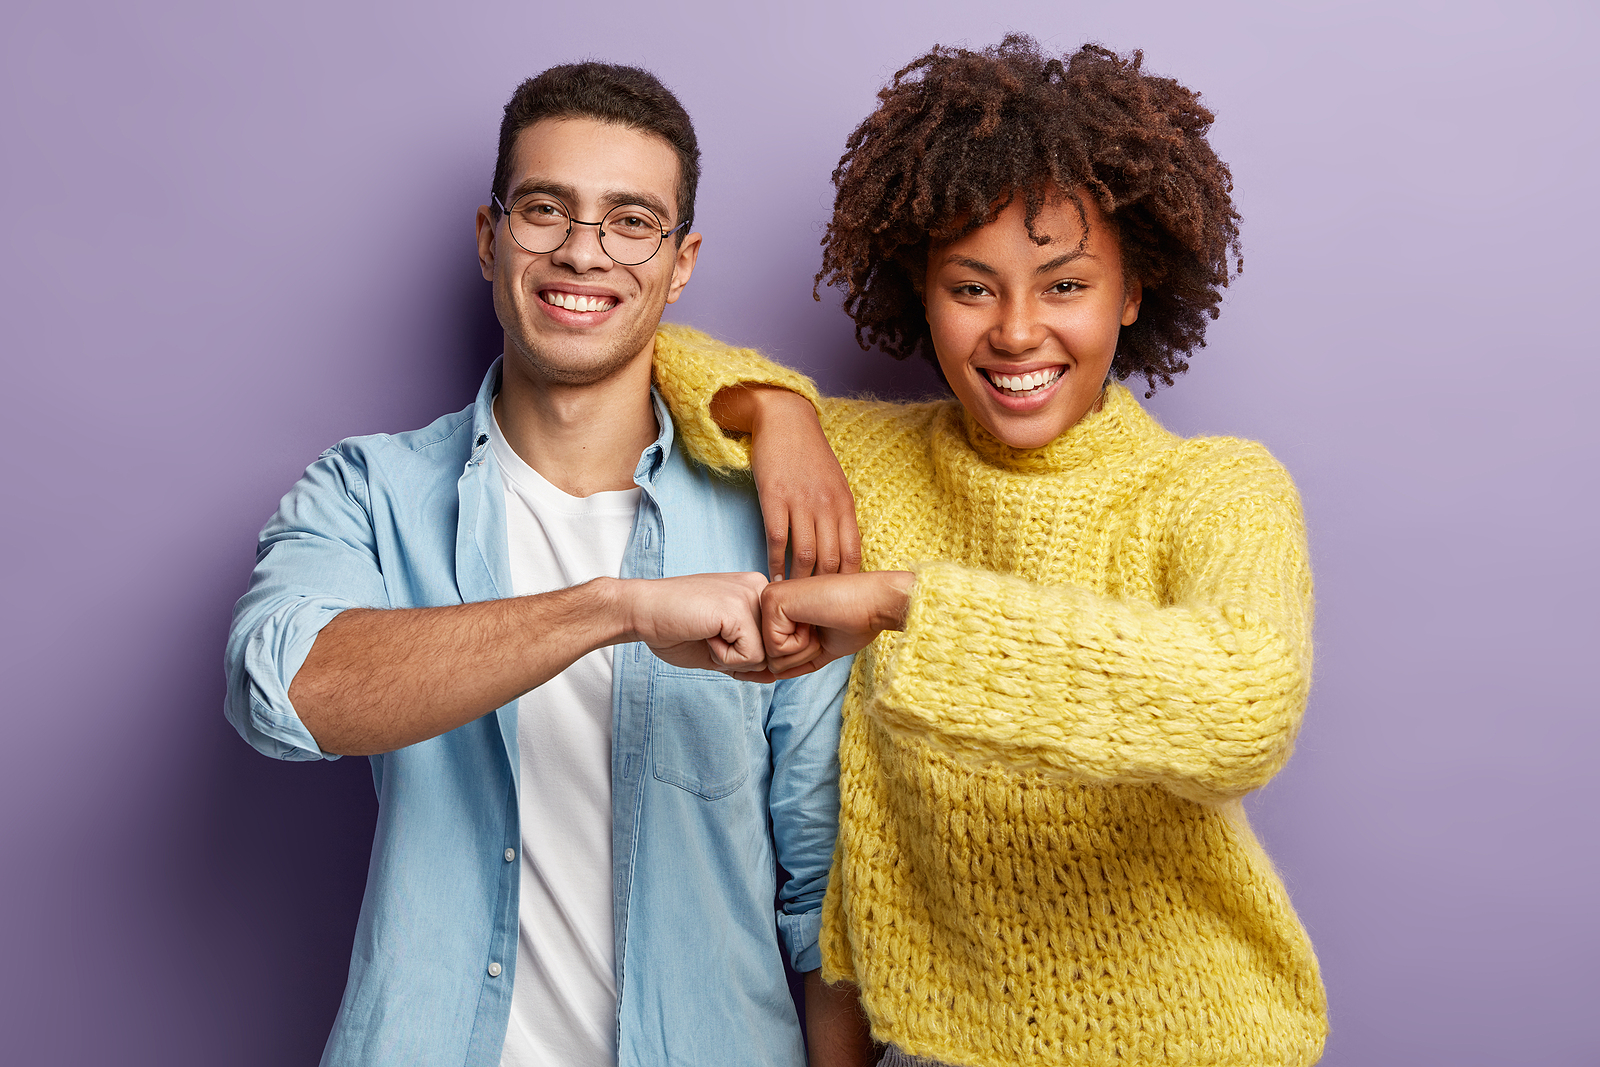 An attractive man and woman of different ethnicities fist bumping and smiling wearing comfortable clothes against a purple background.